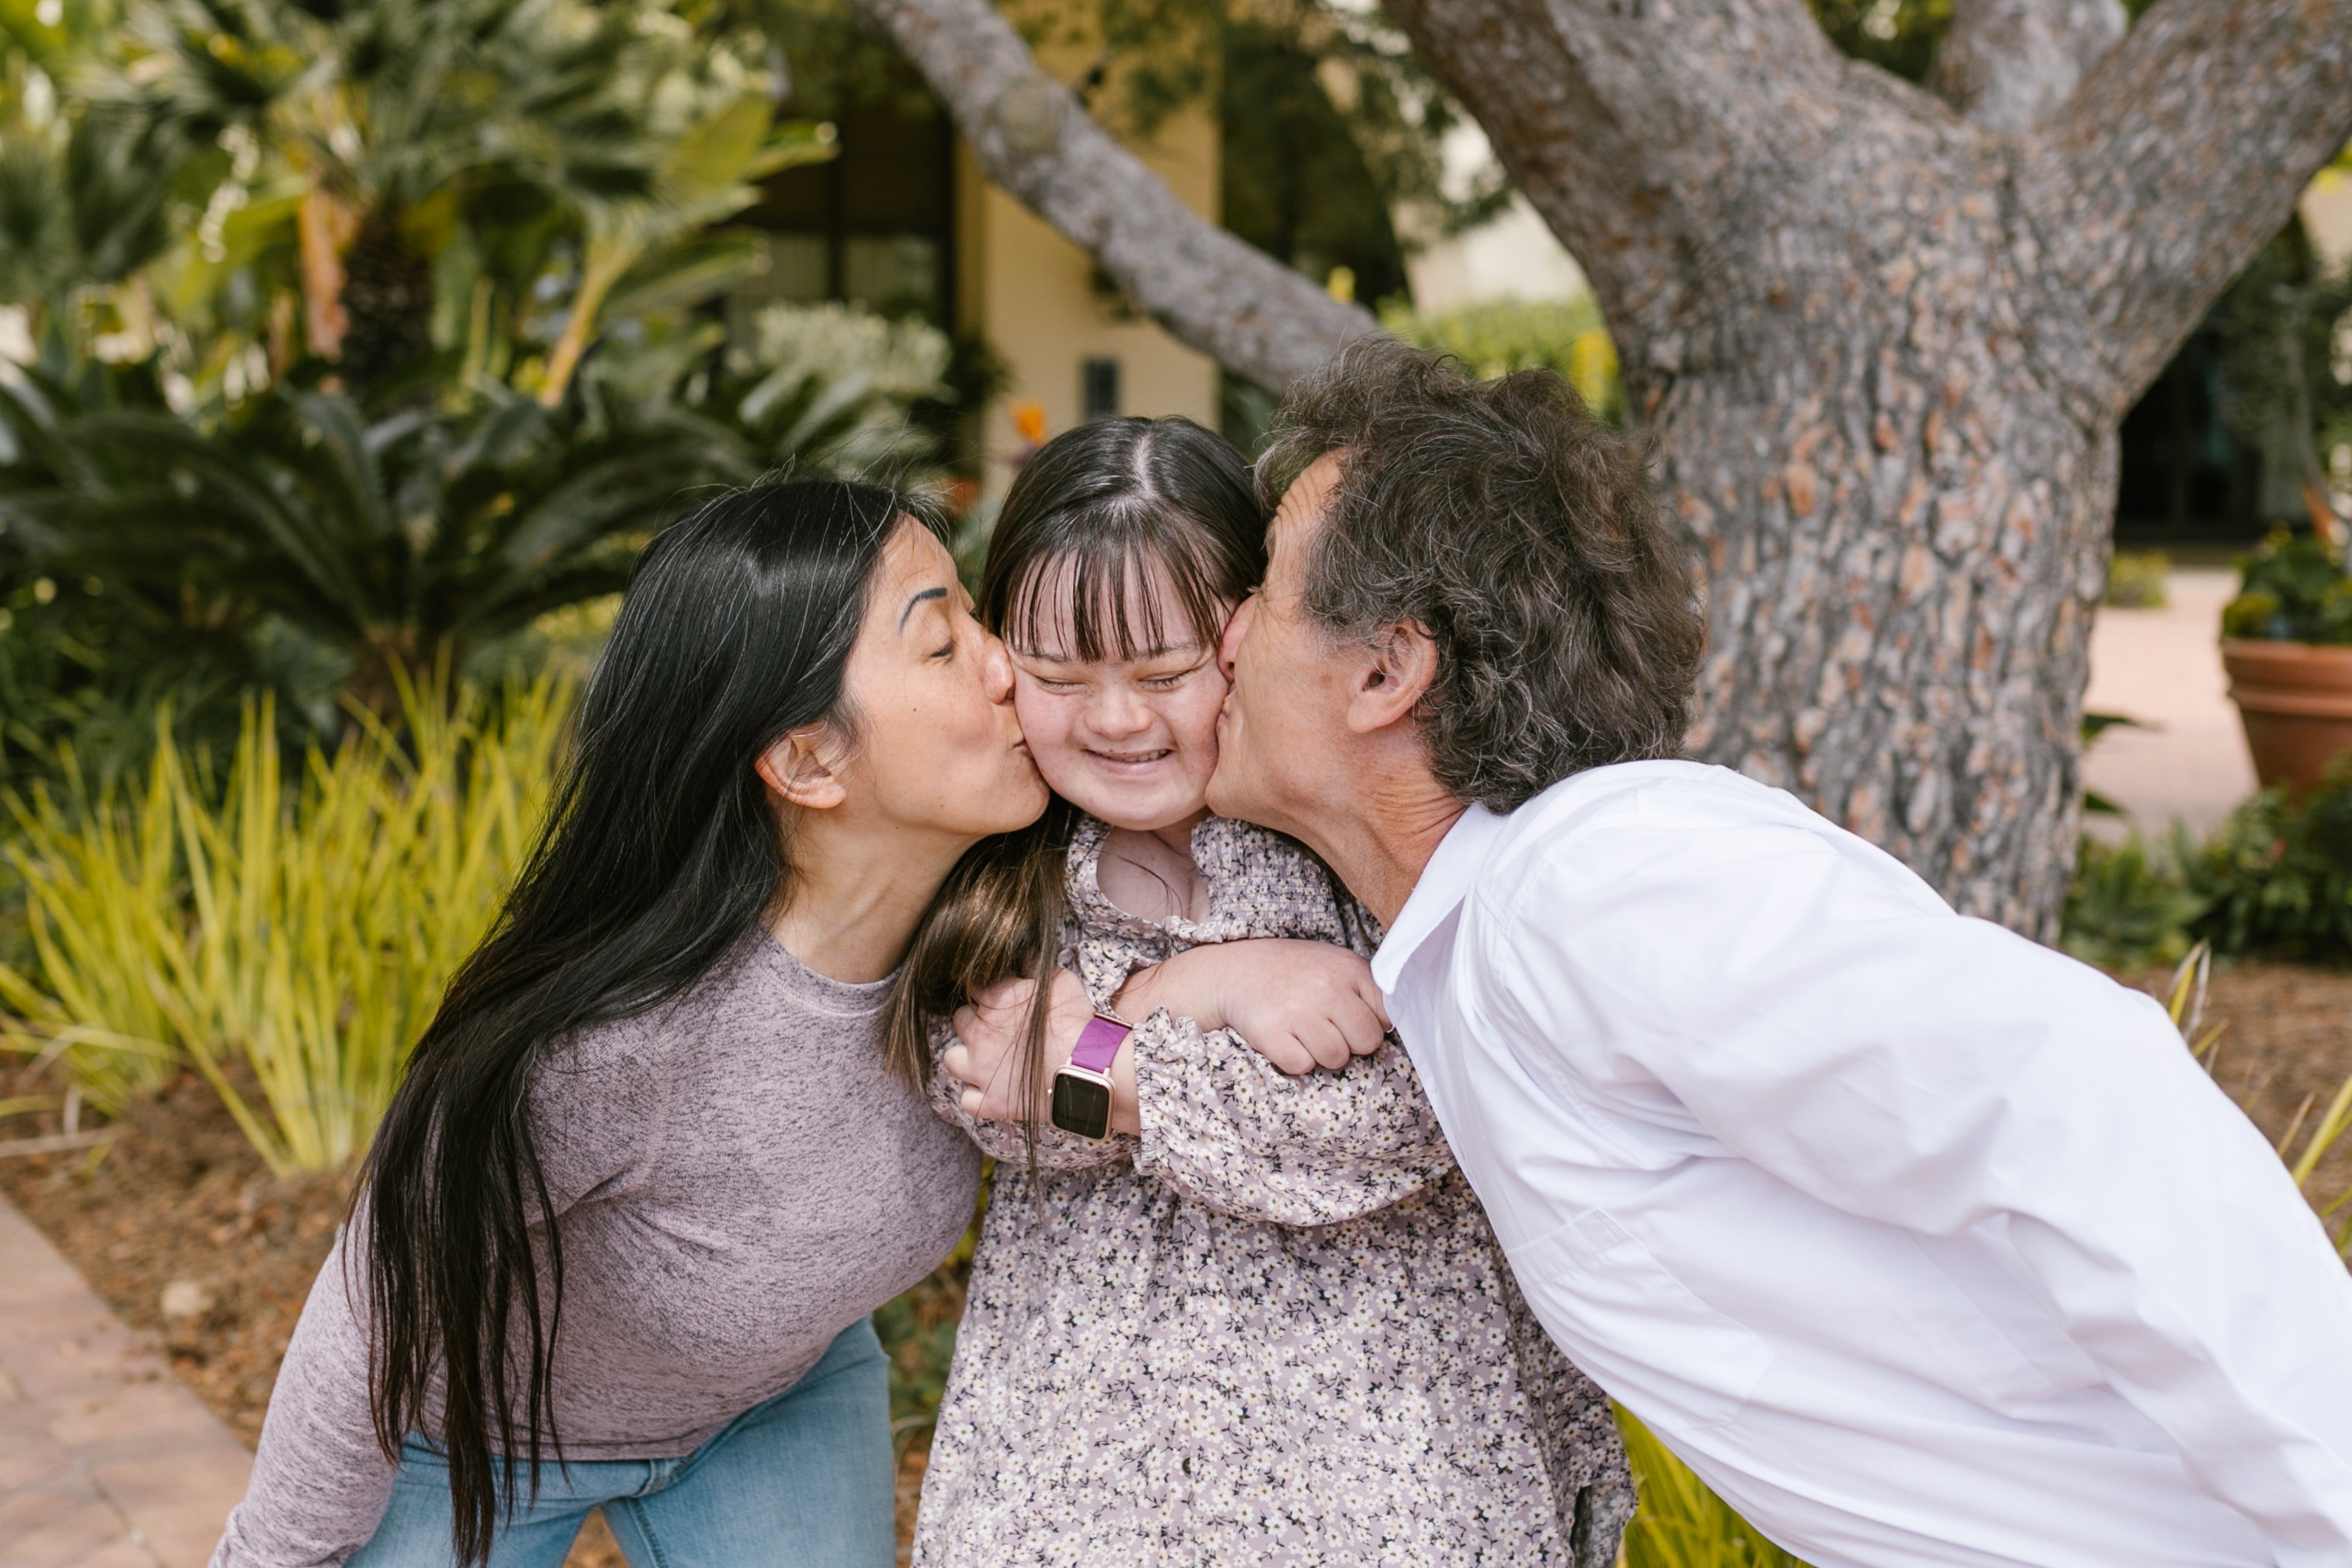 Couple kiss their daughter | Photo: Pexels